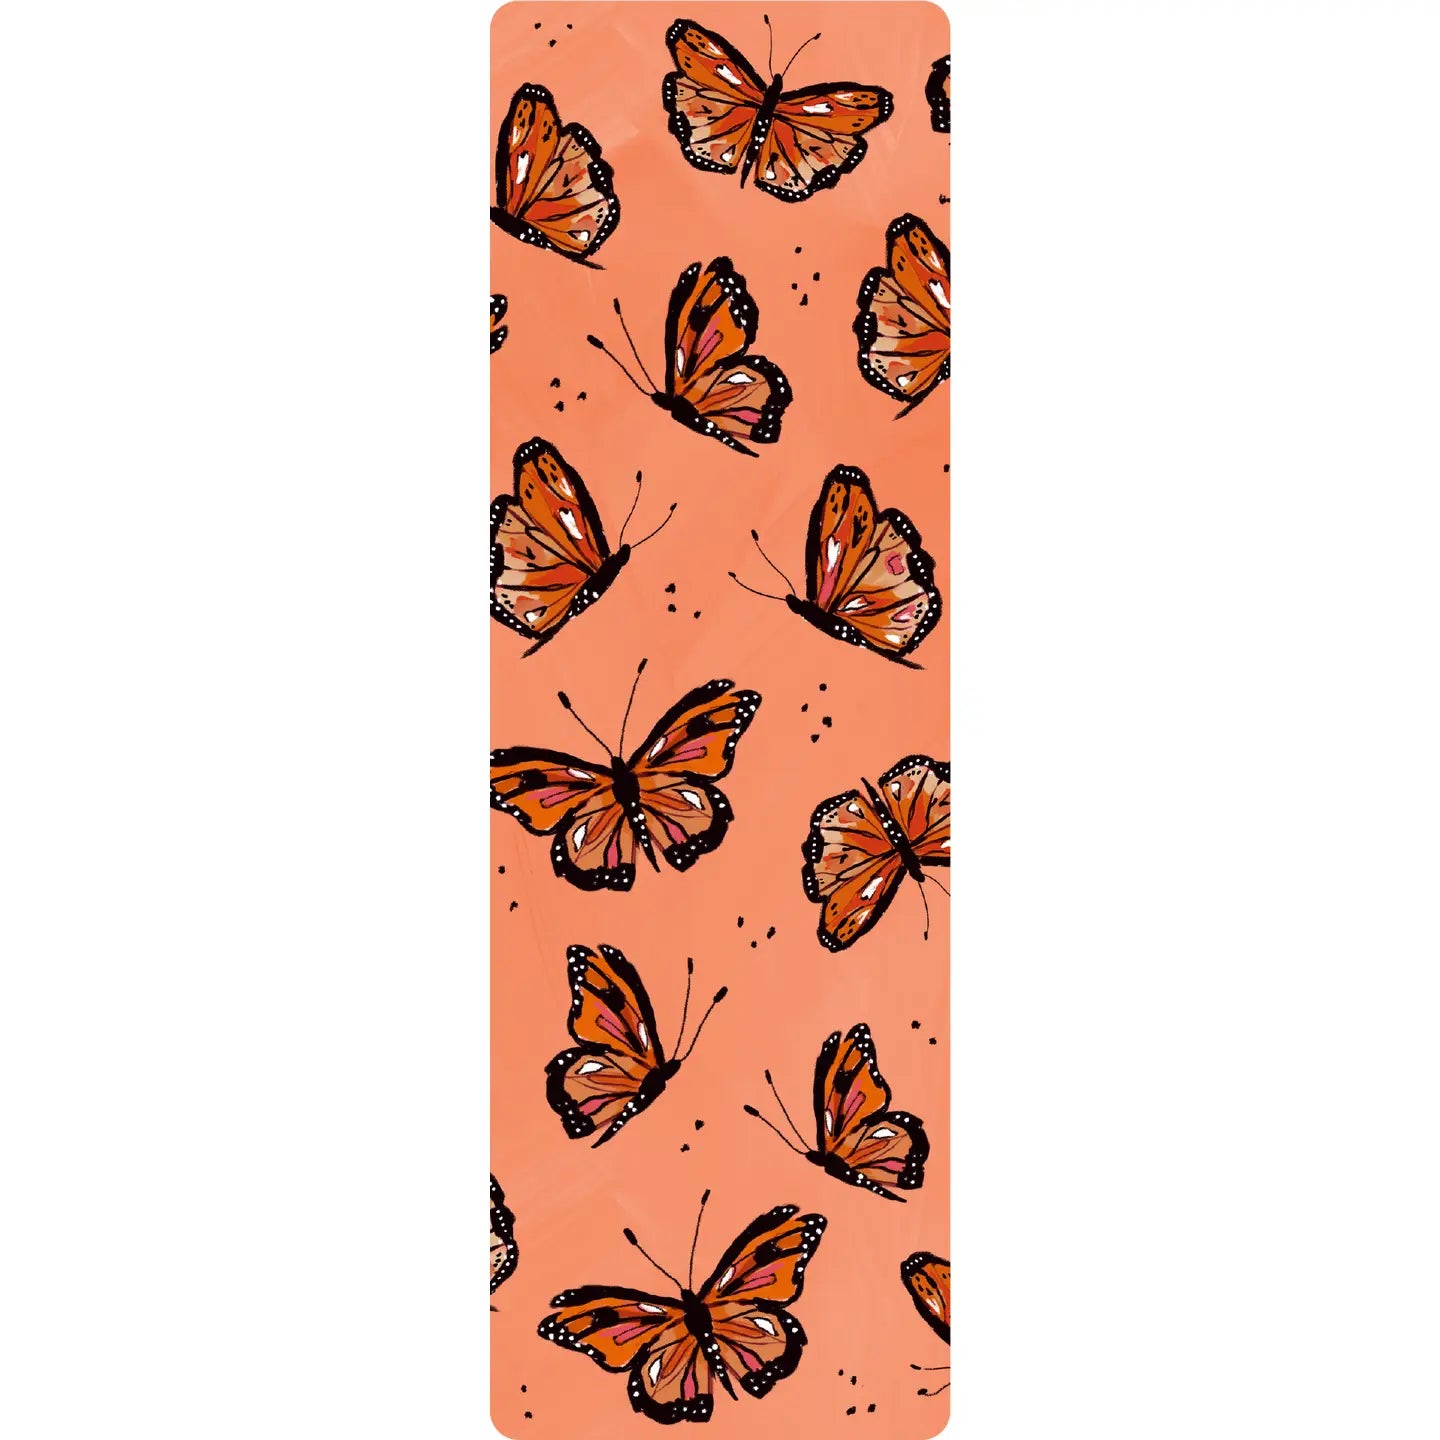 Monarch Butterfly Bookmark